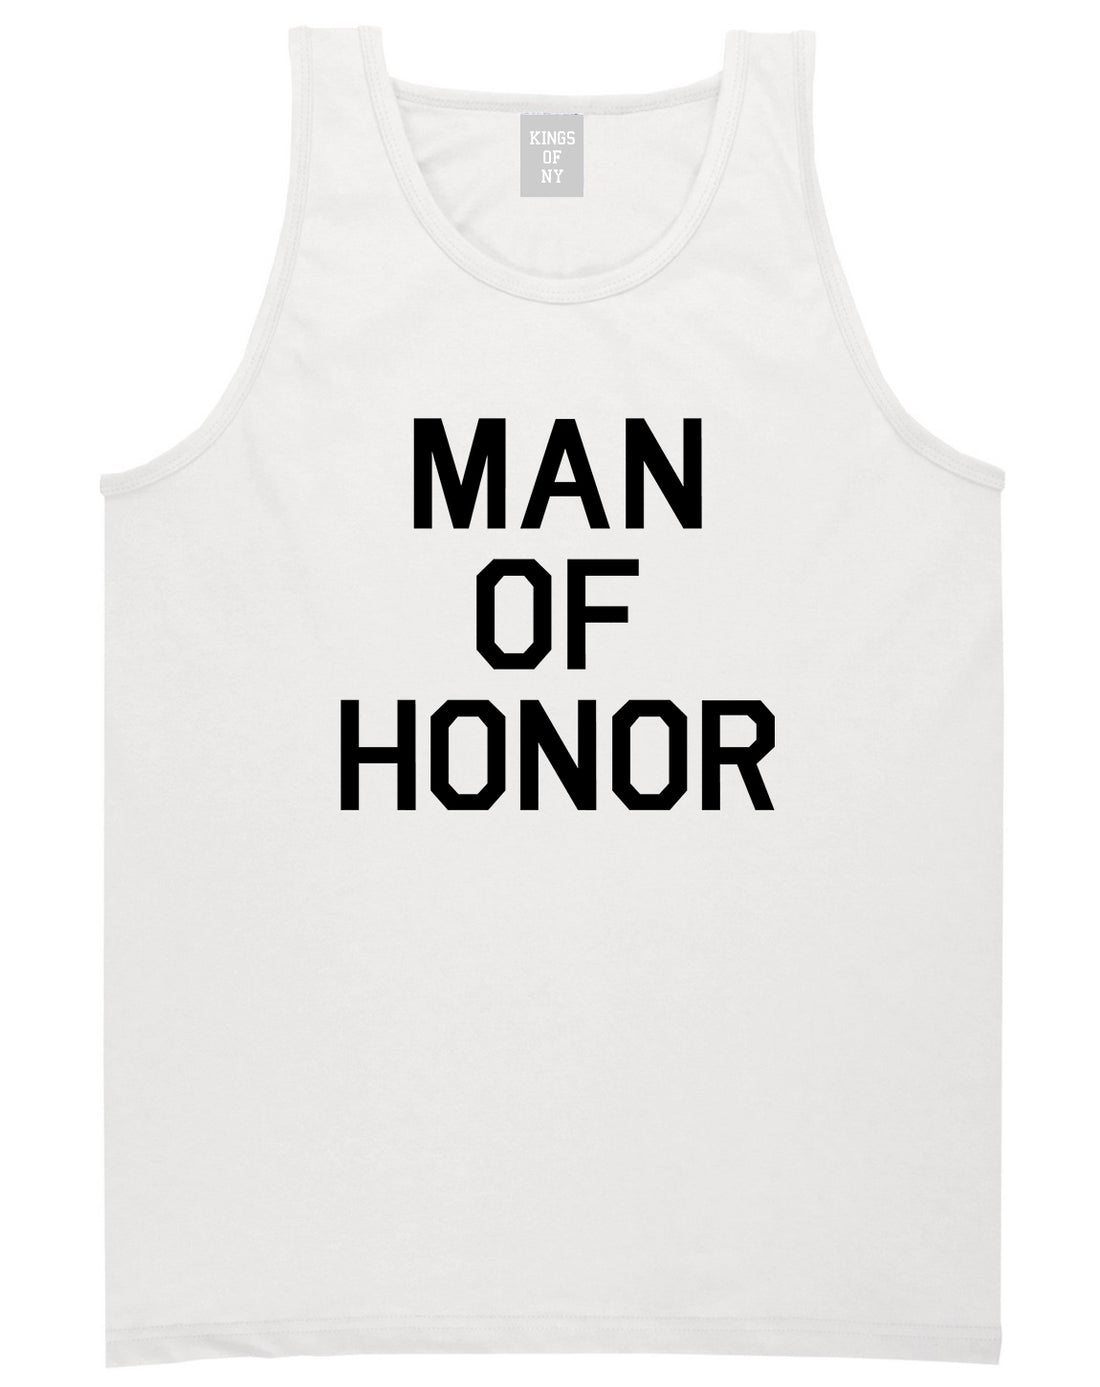 Man Of Honor Funny Bachelor Party Wedding Mens Tank Top Shirt White